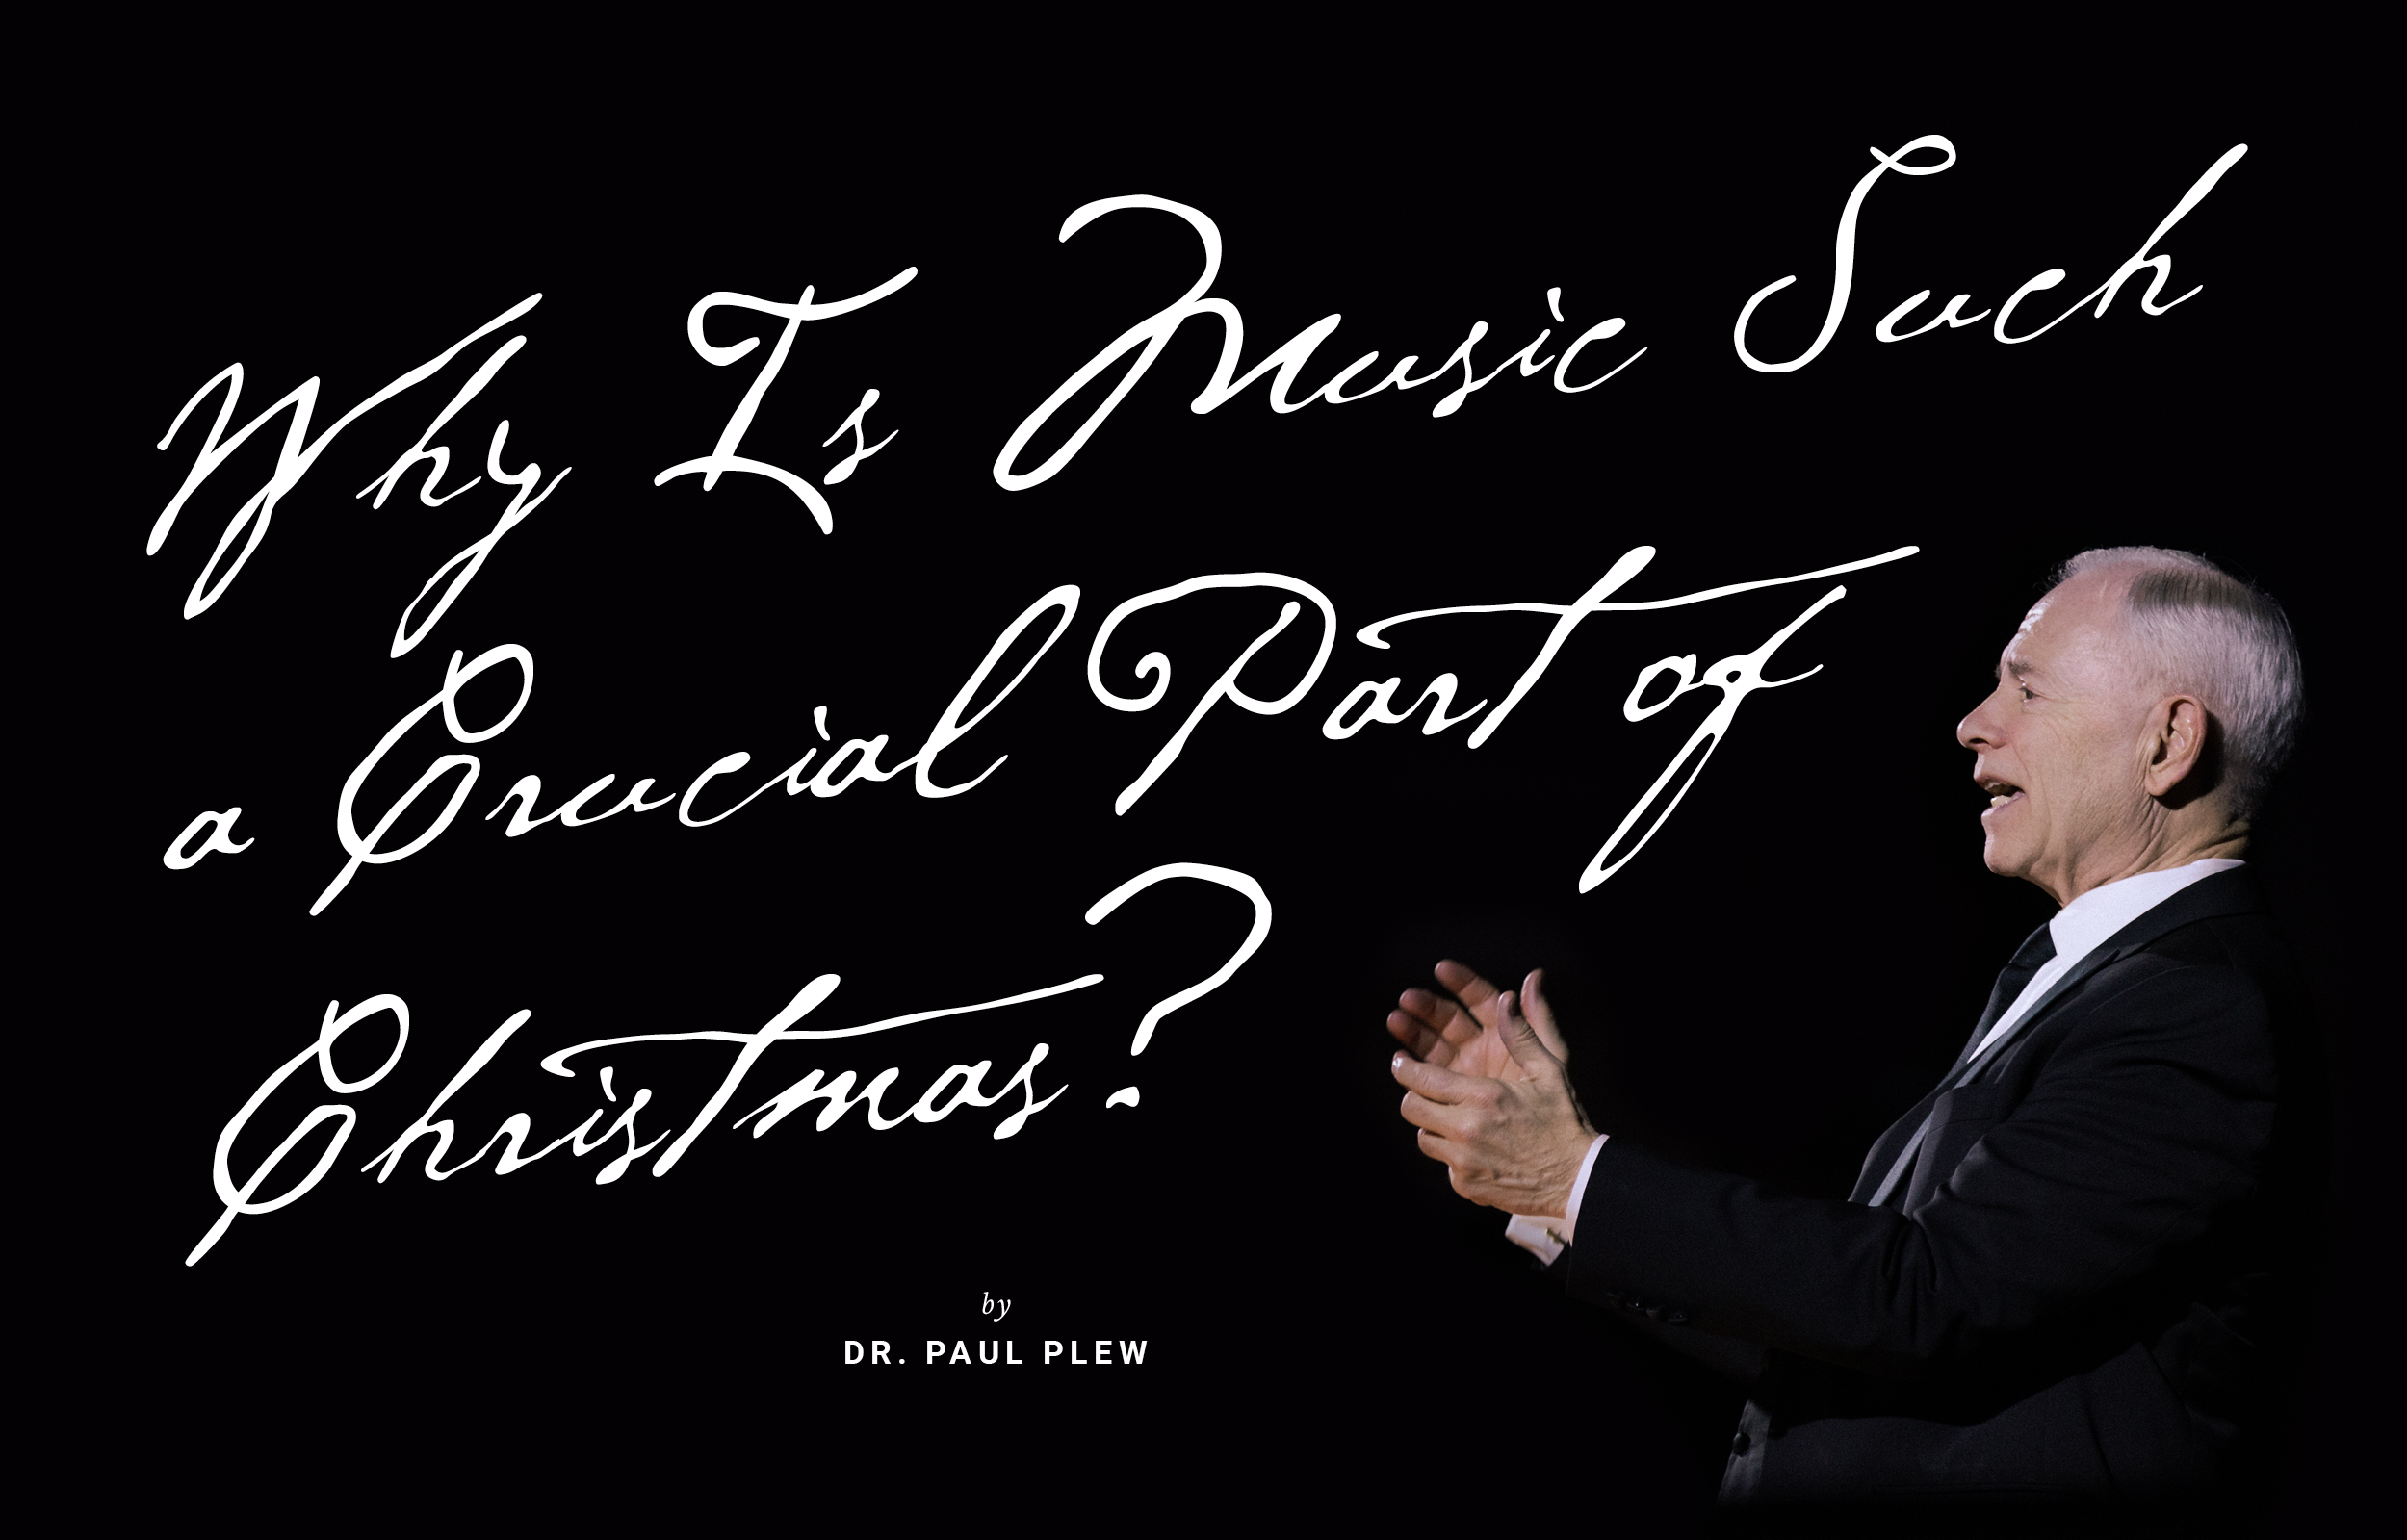 Dr. Paul Plew Explains the Inextricable Link Between Christmas and Music Featured Image